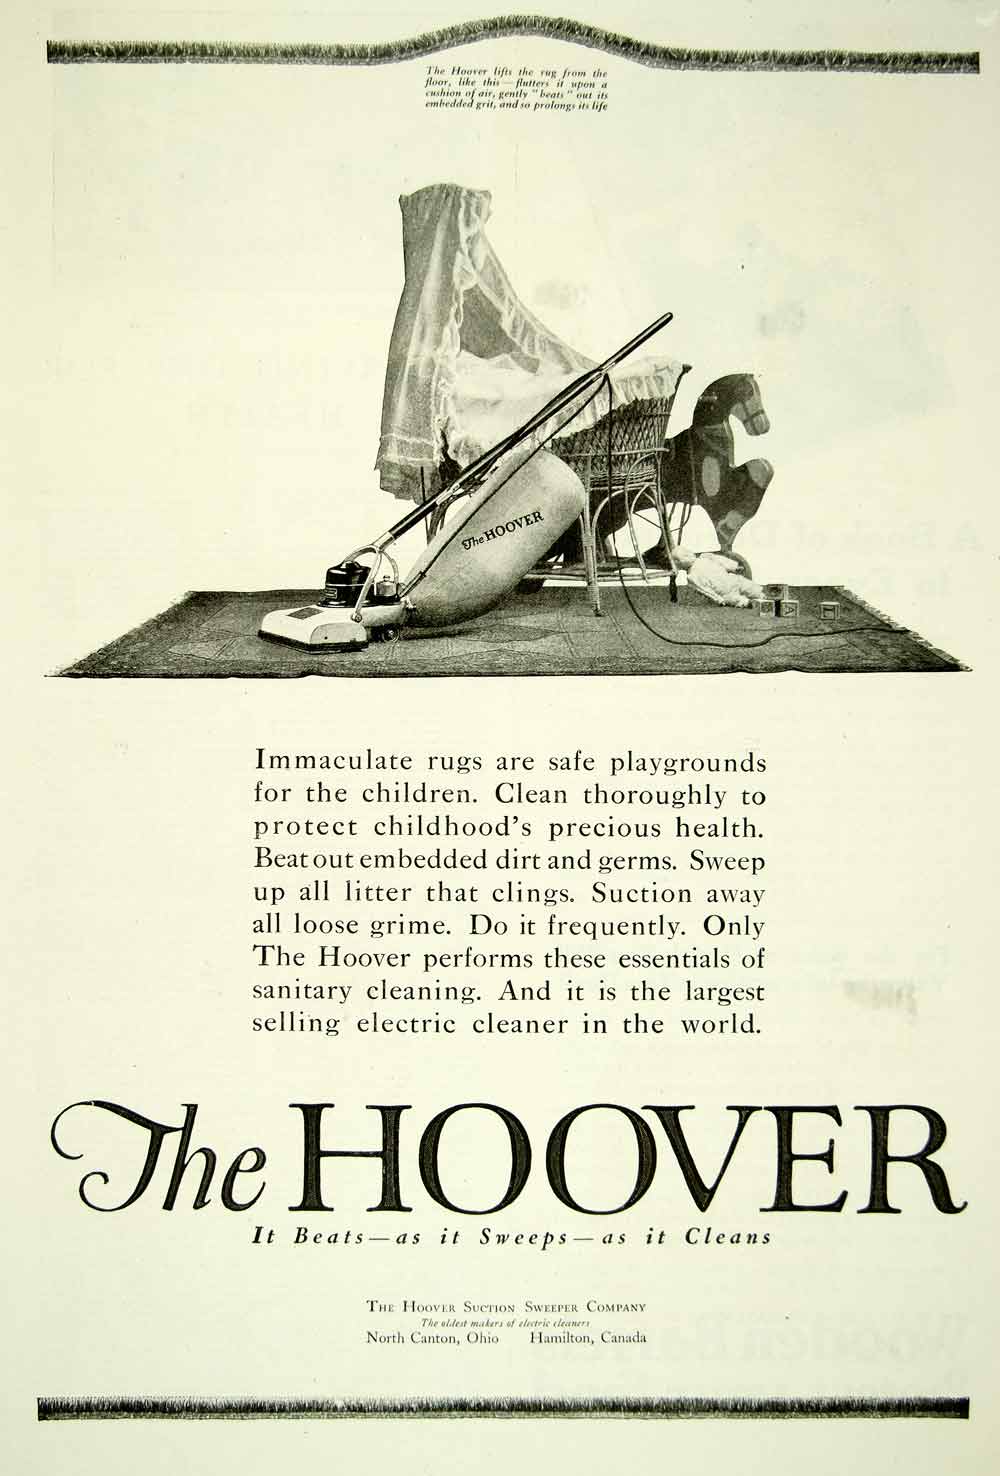 1920 Ad Hoover Vacuum Cleaner Crib Electric Suction Sweeper Cleaning Rug YDL9